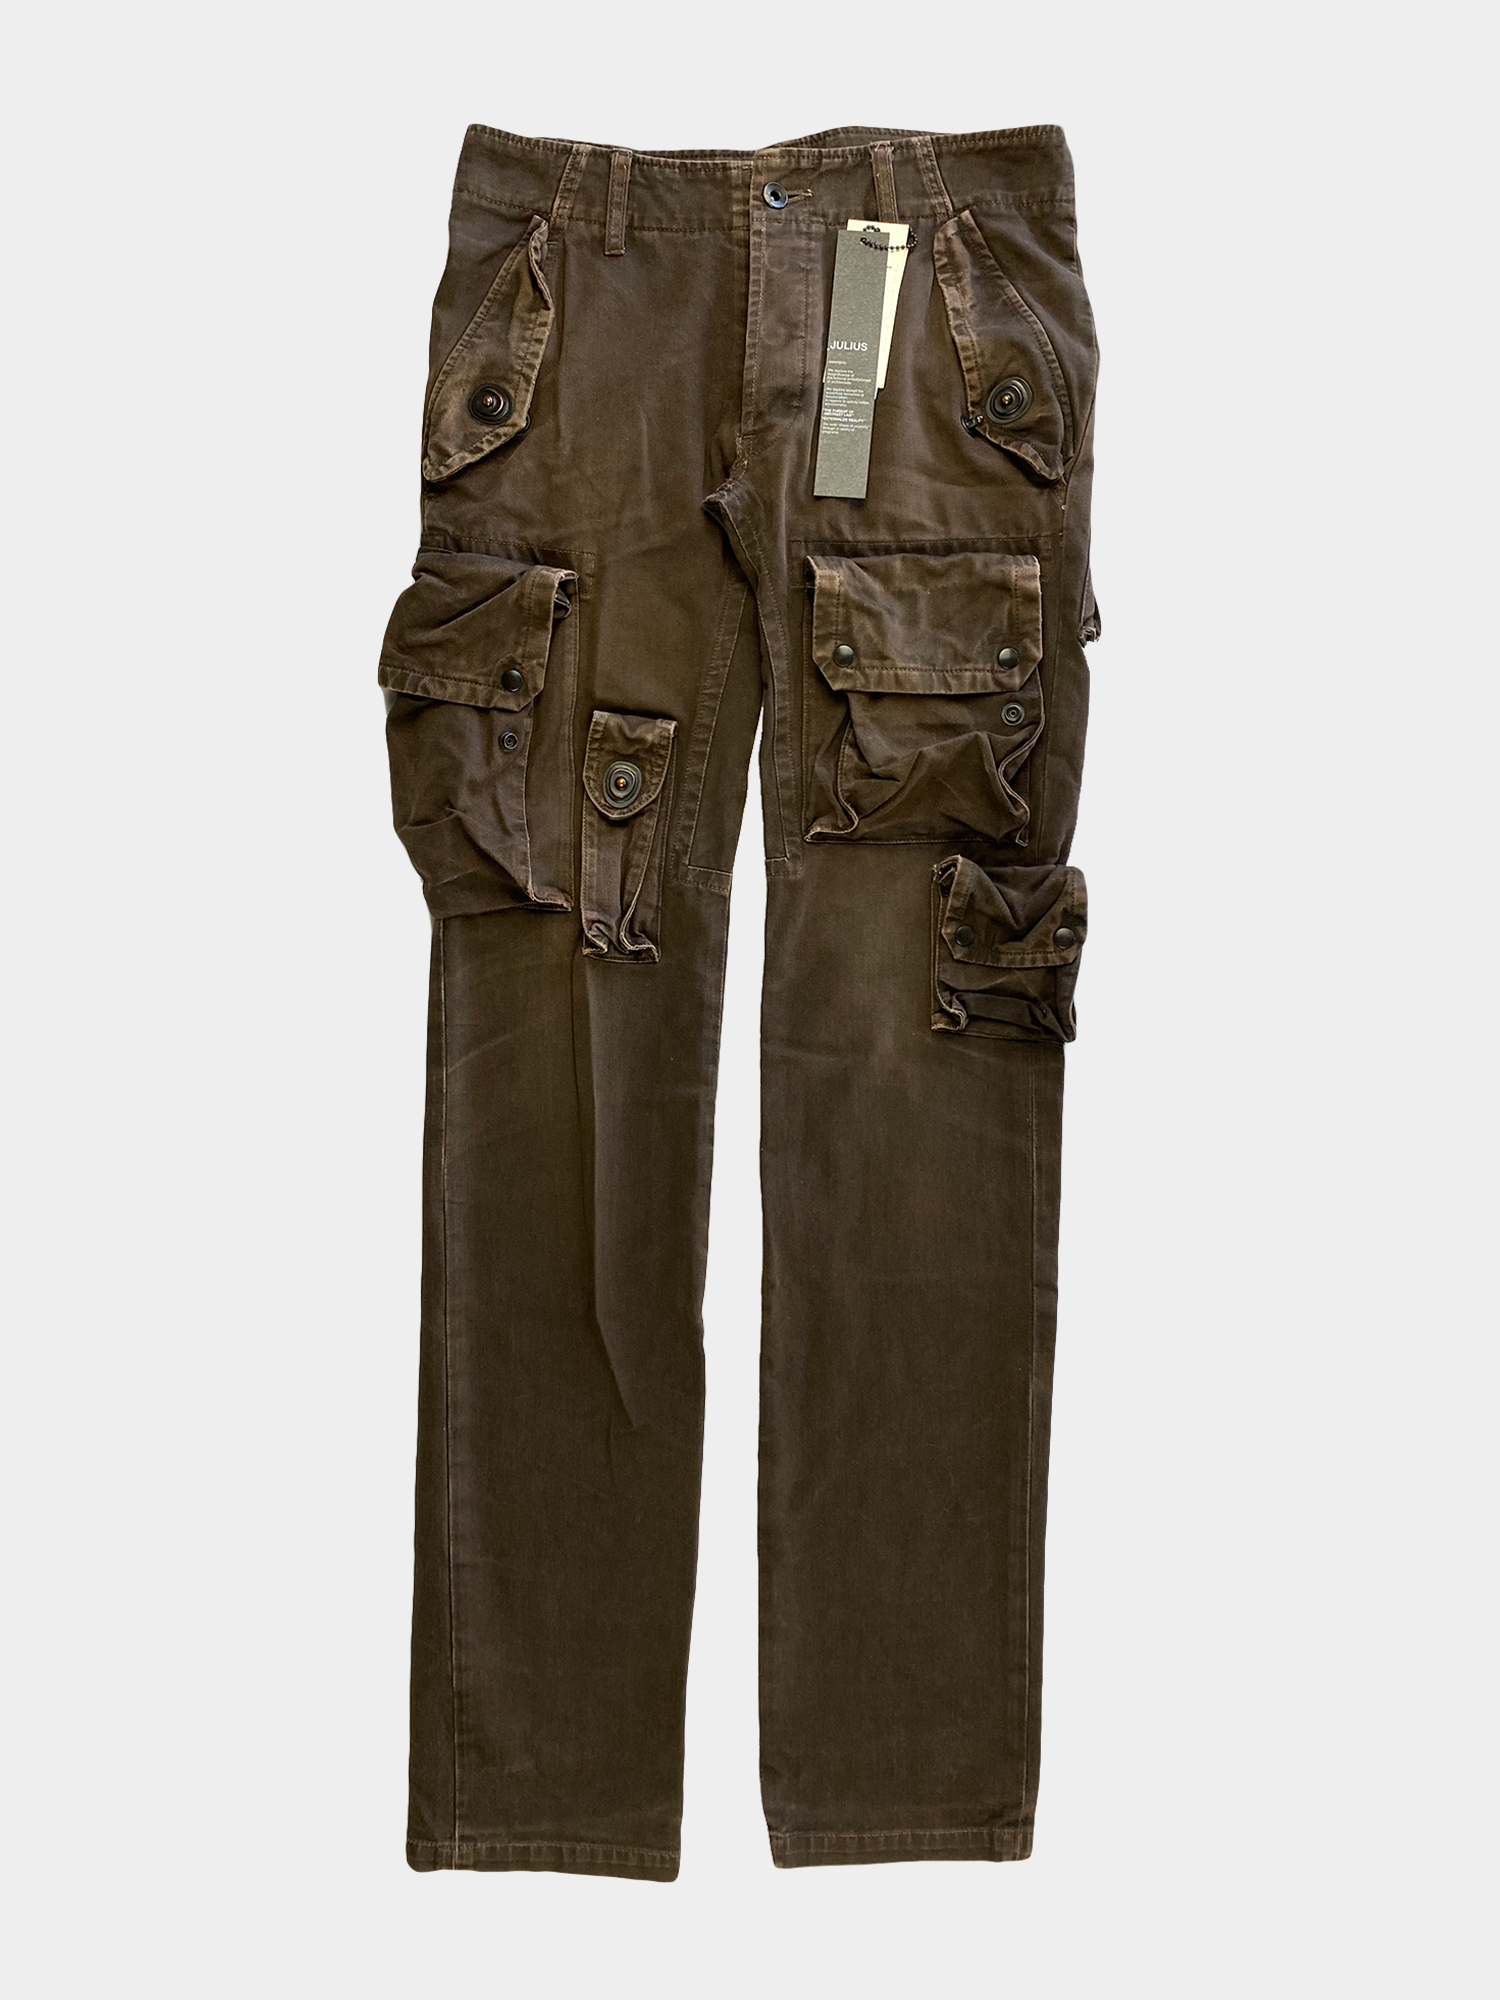 kat perforere tro Julius AW2008 "Insanity in Industrial" Gas Mask Cargos - ARCHIVED